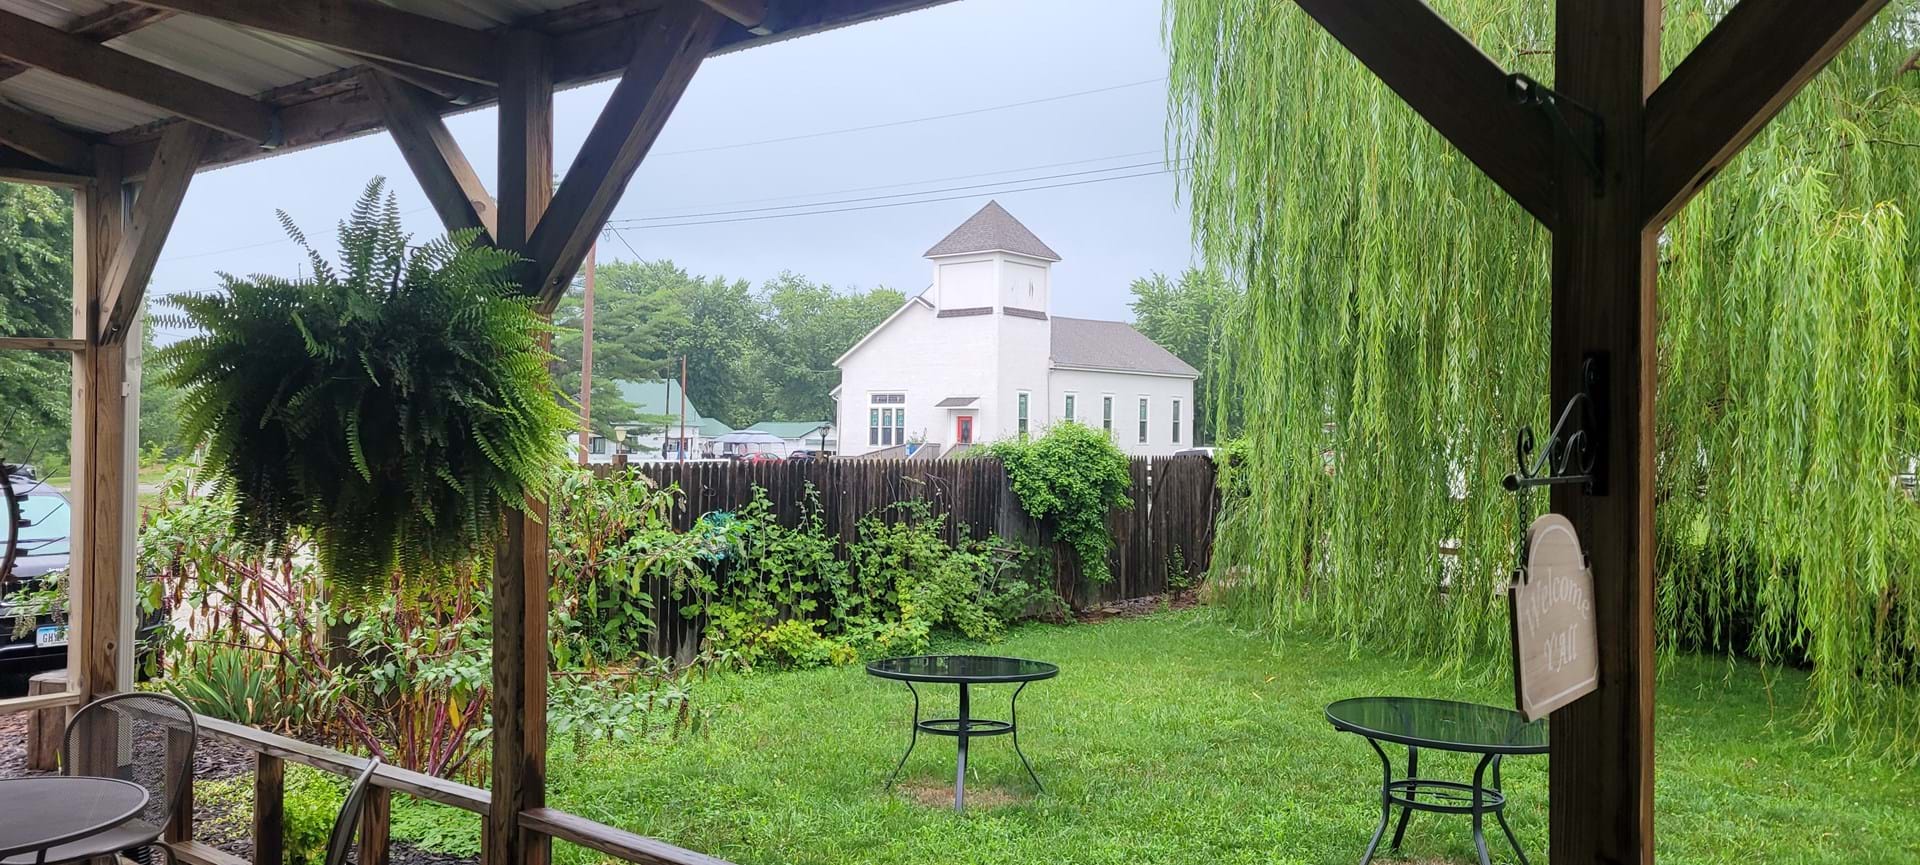 A view from the Muddy Dog Porch of the oldest church building in Appanoose County.